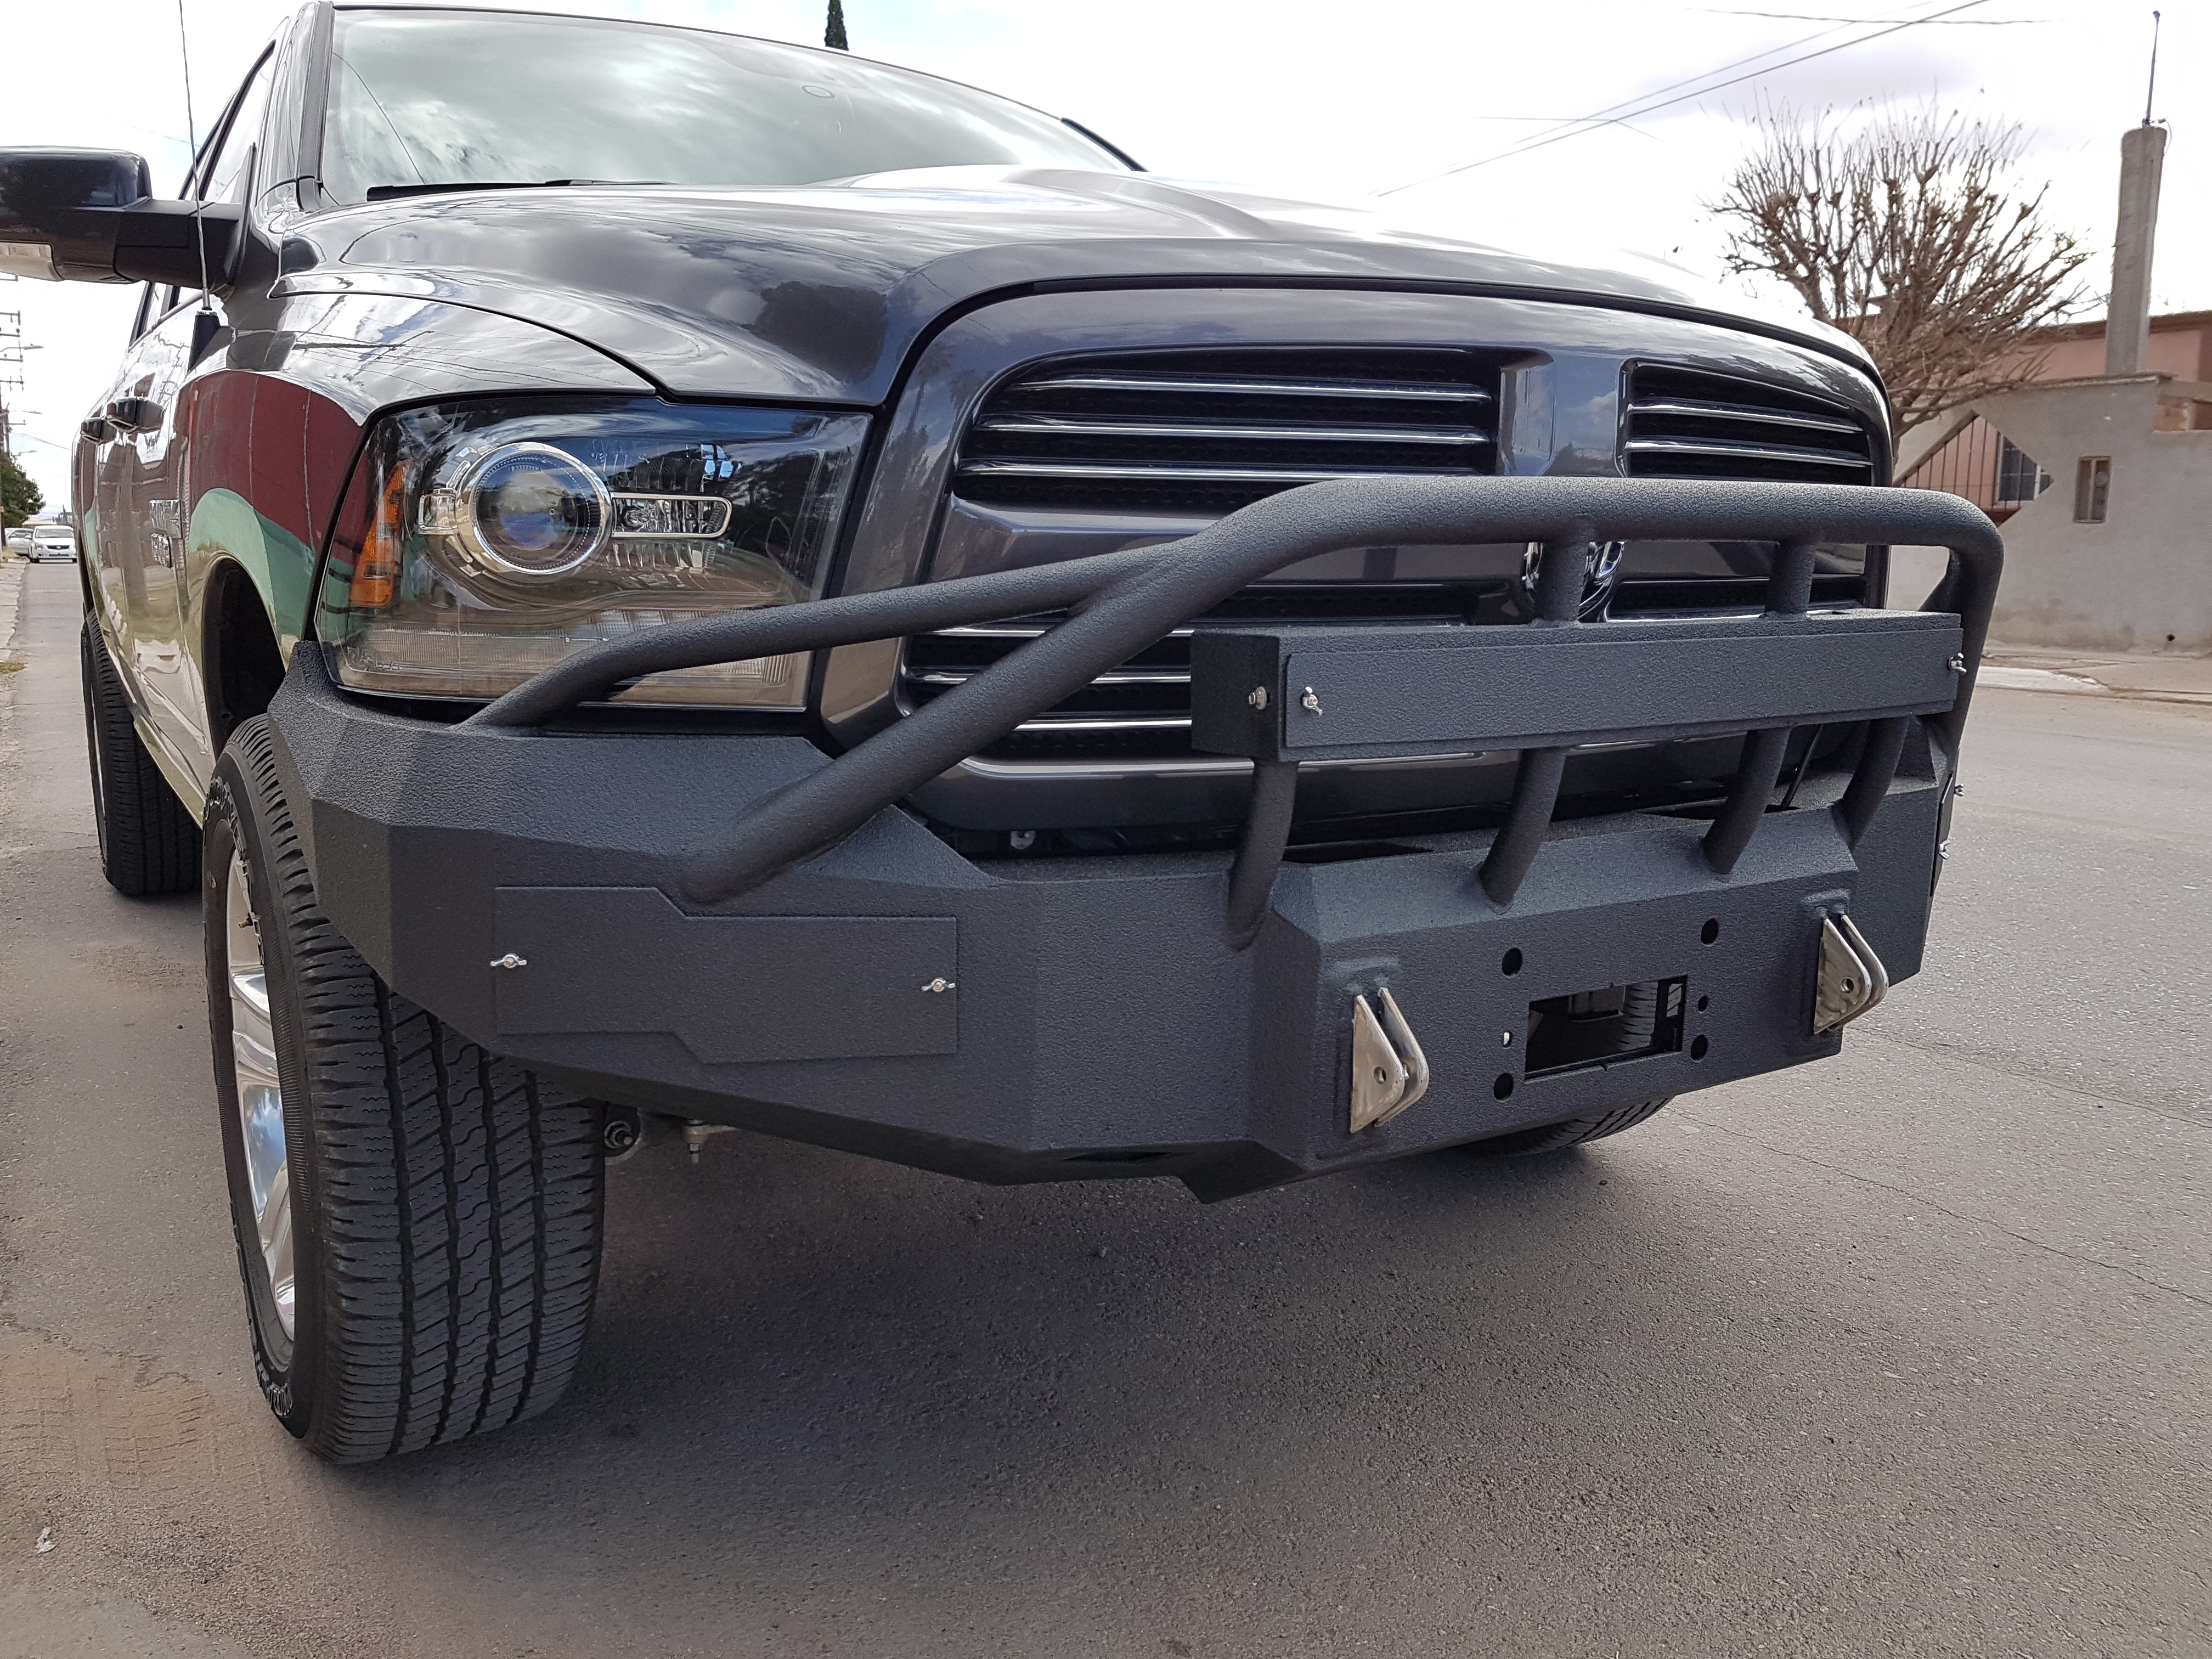 13-21 Dodge 1500 Delta 4 with light bar plate and square lights